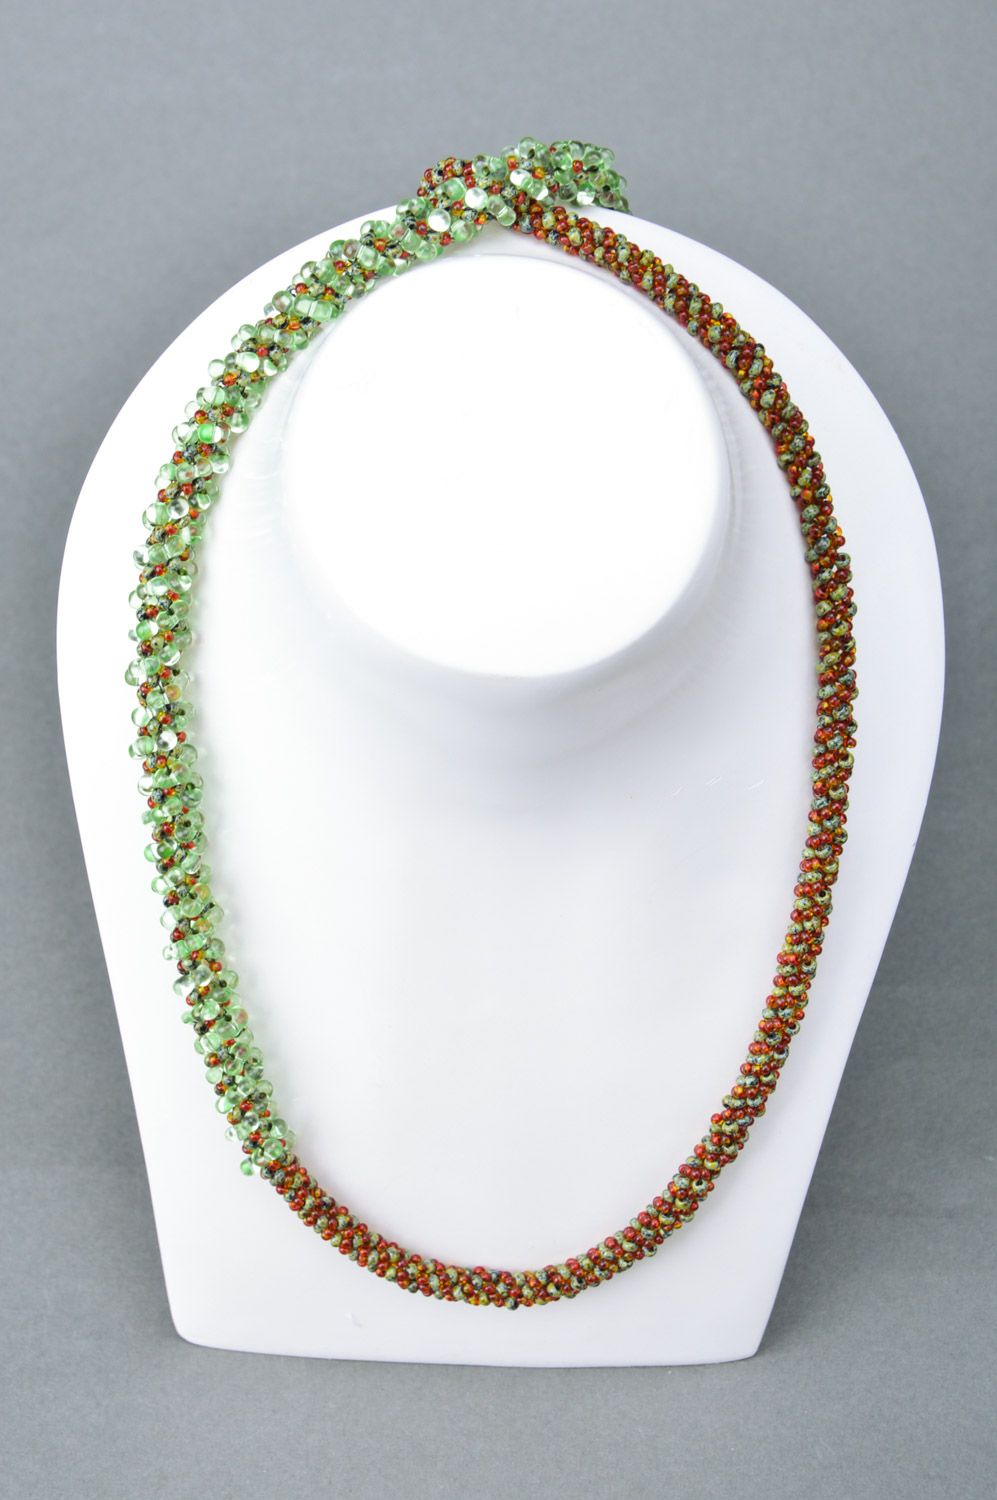 Stylish handmade beaded cord necklace in green and brown colors for every day photo 3